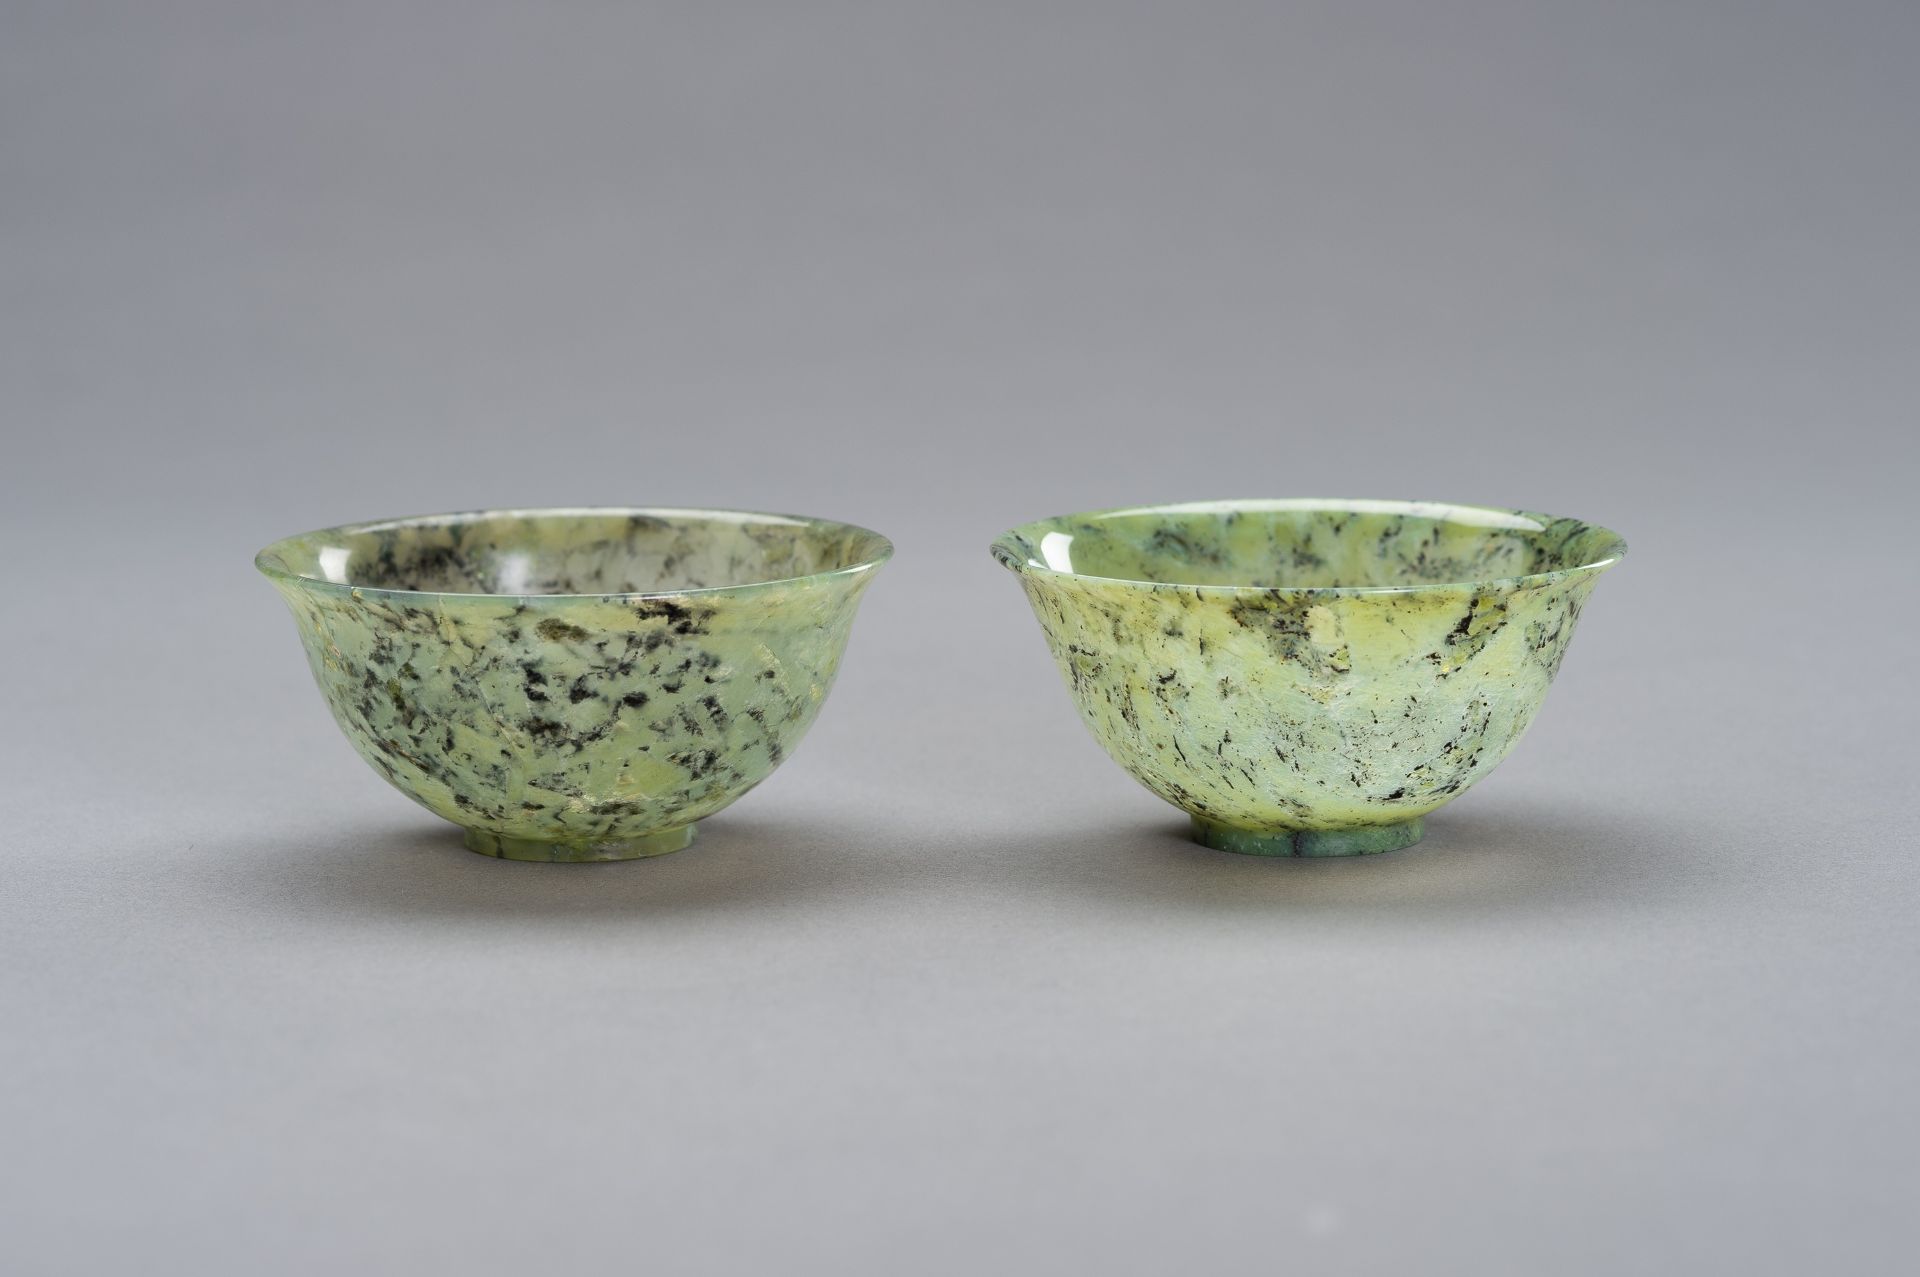 A MOTTLED PAIR OF JADE BOWLS